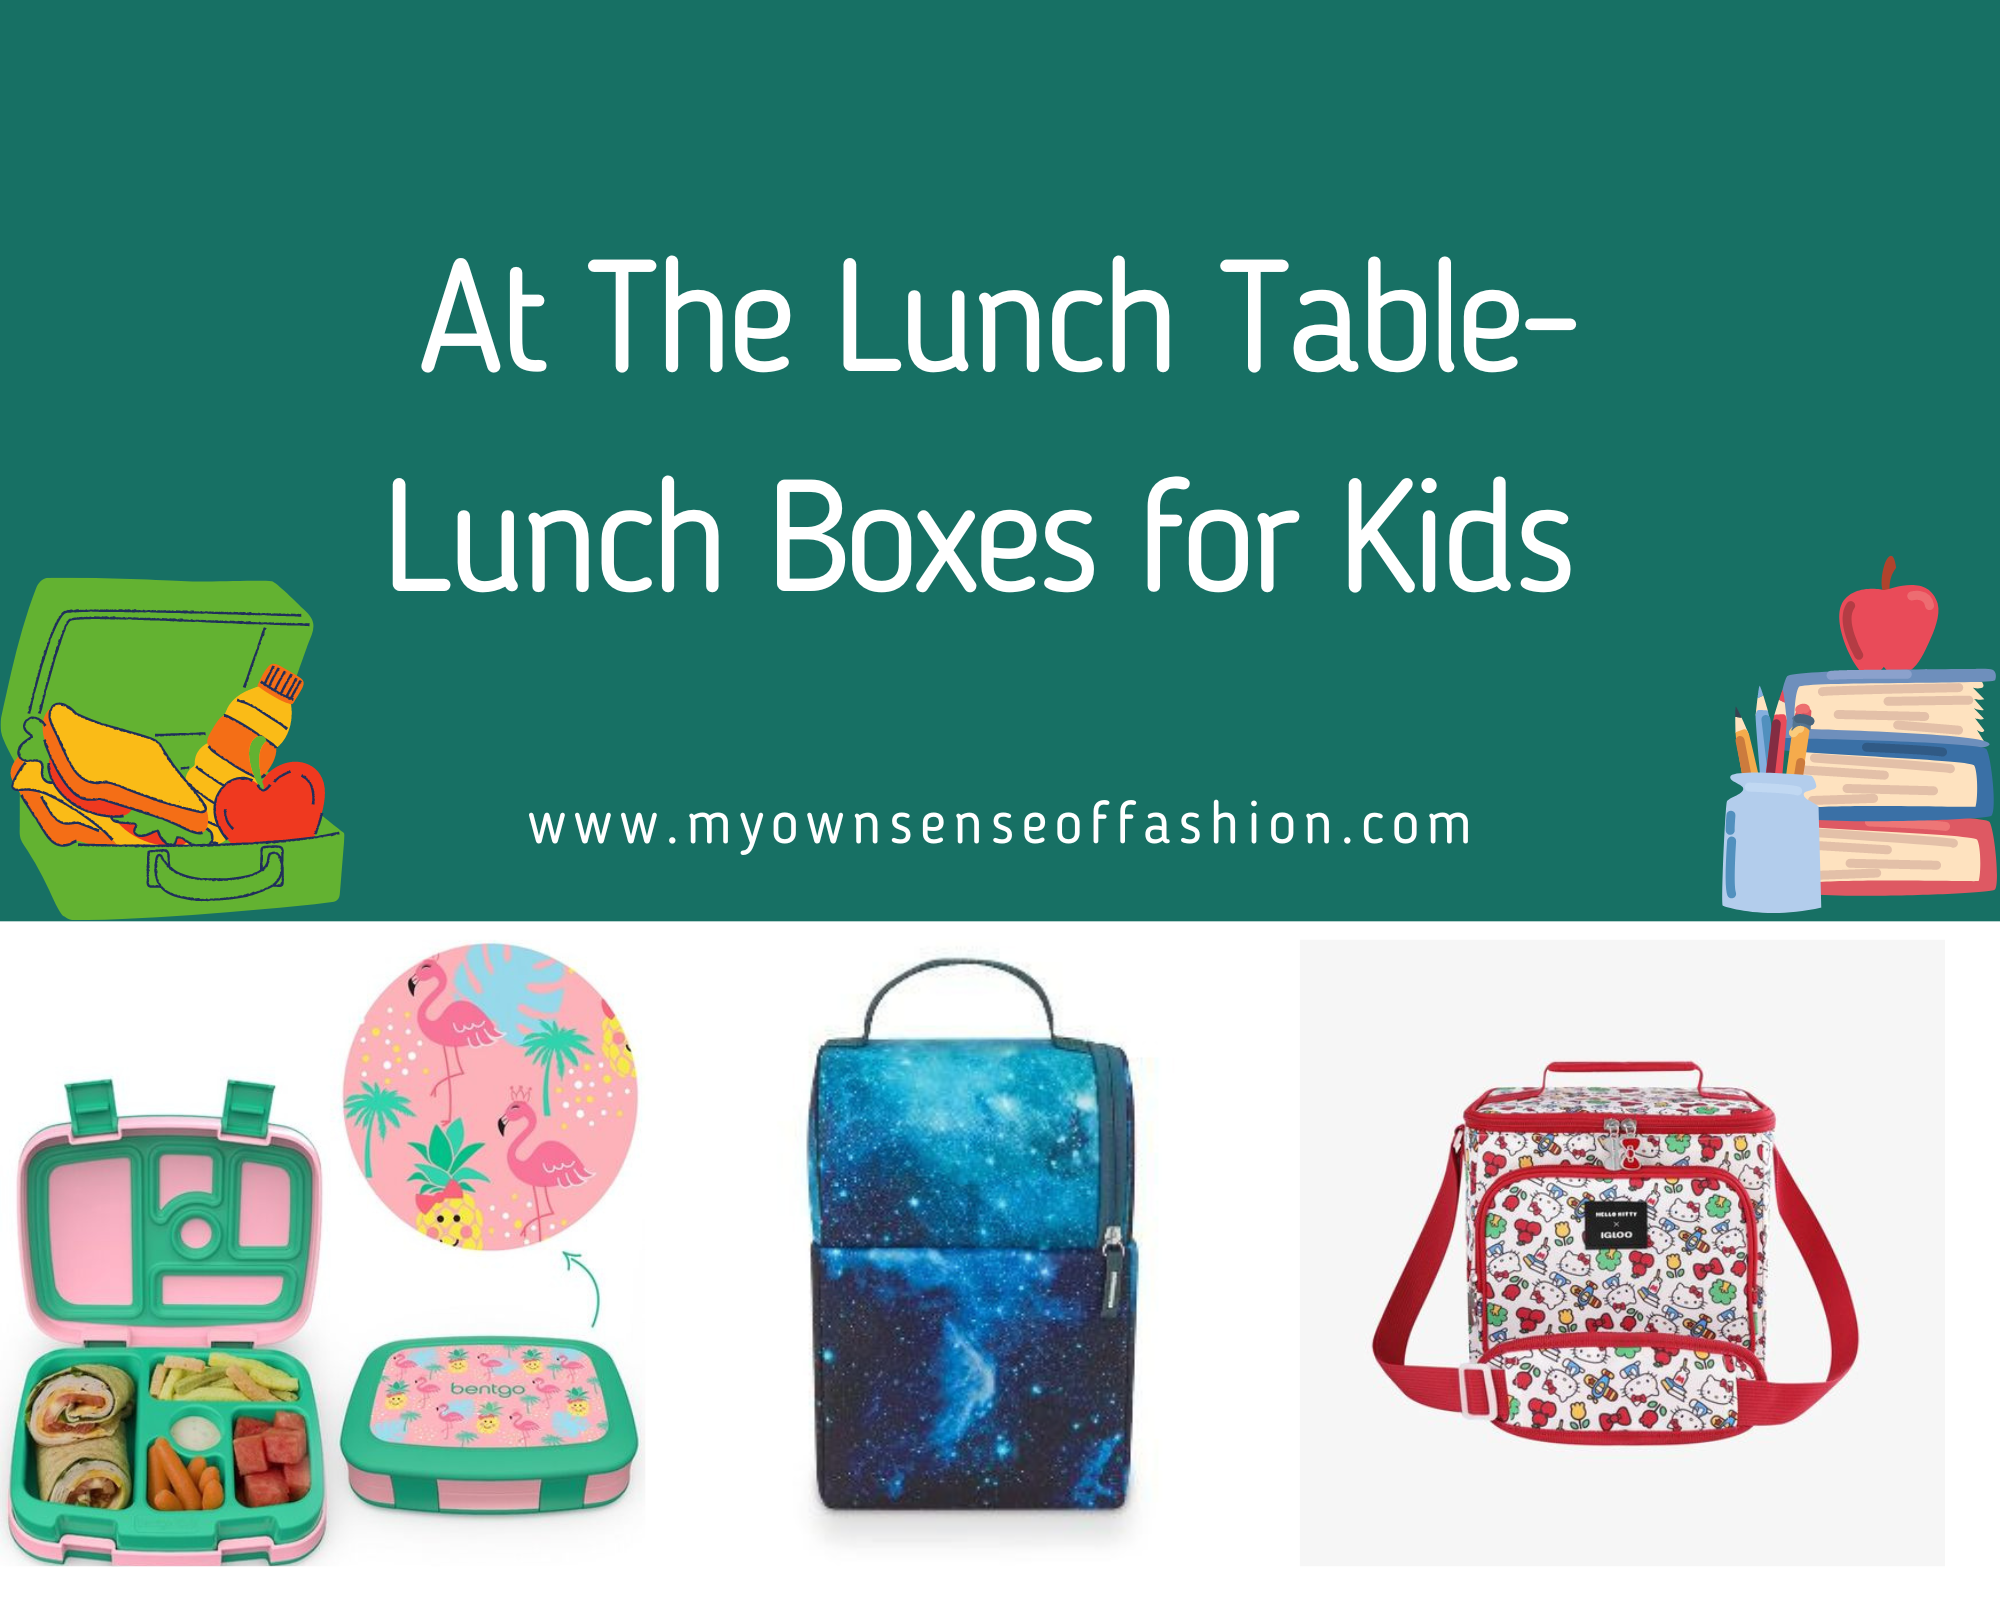 https://myownsenseoffashion.com/wp-content/uploads/2022/08/At-The-Lunch-Table-Lunch-Boxes-for-KidsTitle-Collage.png